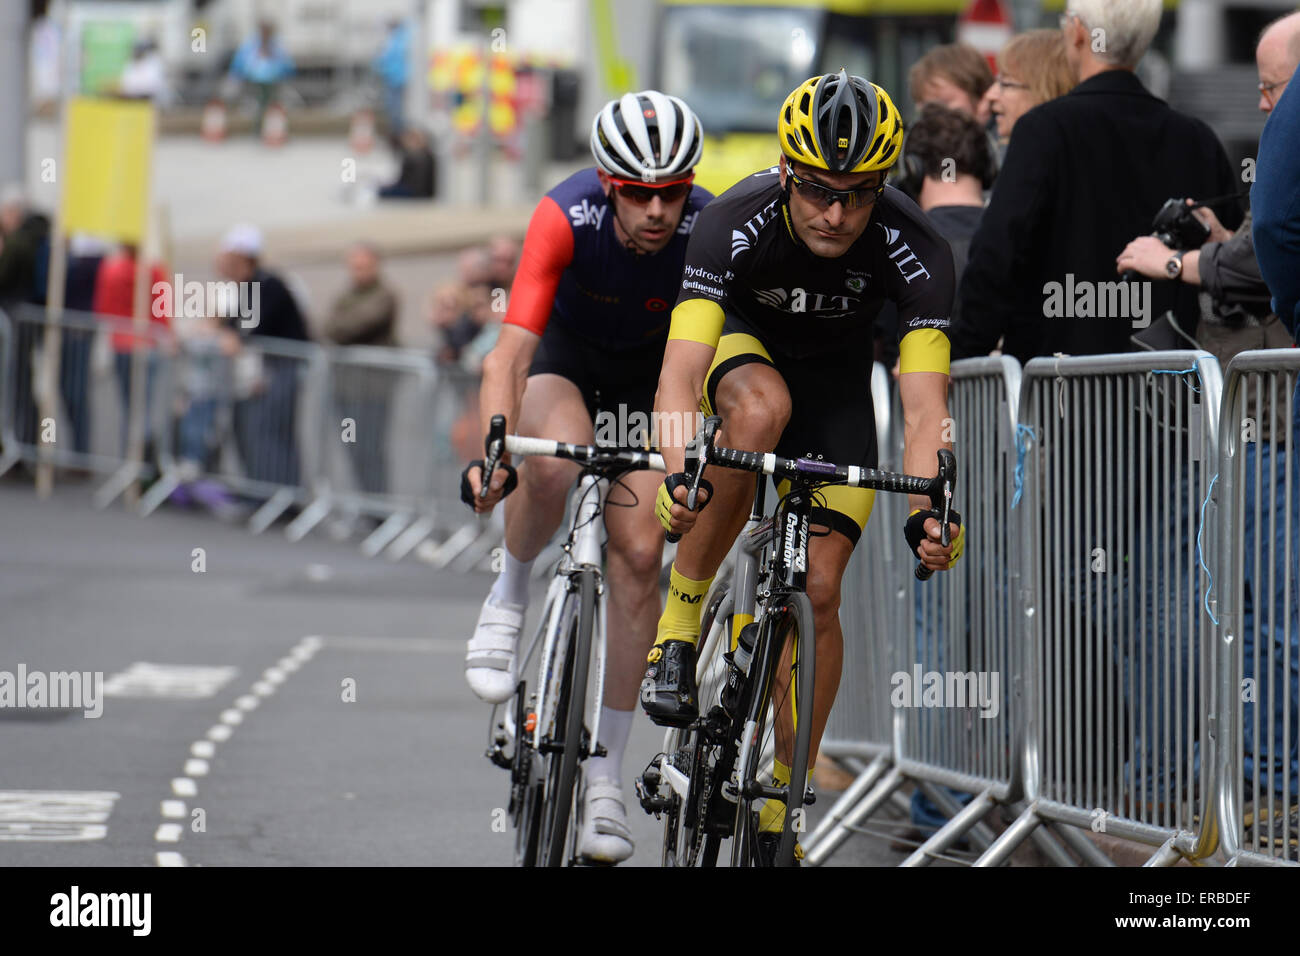 Kristian House (JLT Condor) leads Andy Tennant (Team Wiggins) in the Milk Race at Nottingham, United Kingdom on 24 May 2015 Stock Photo